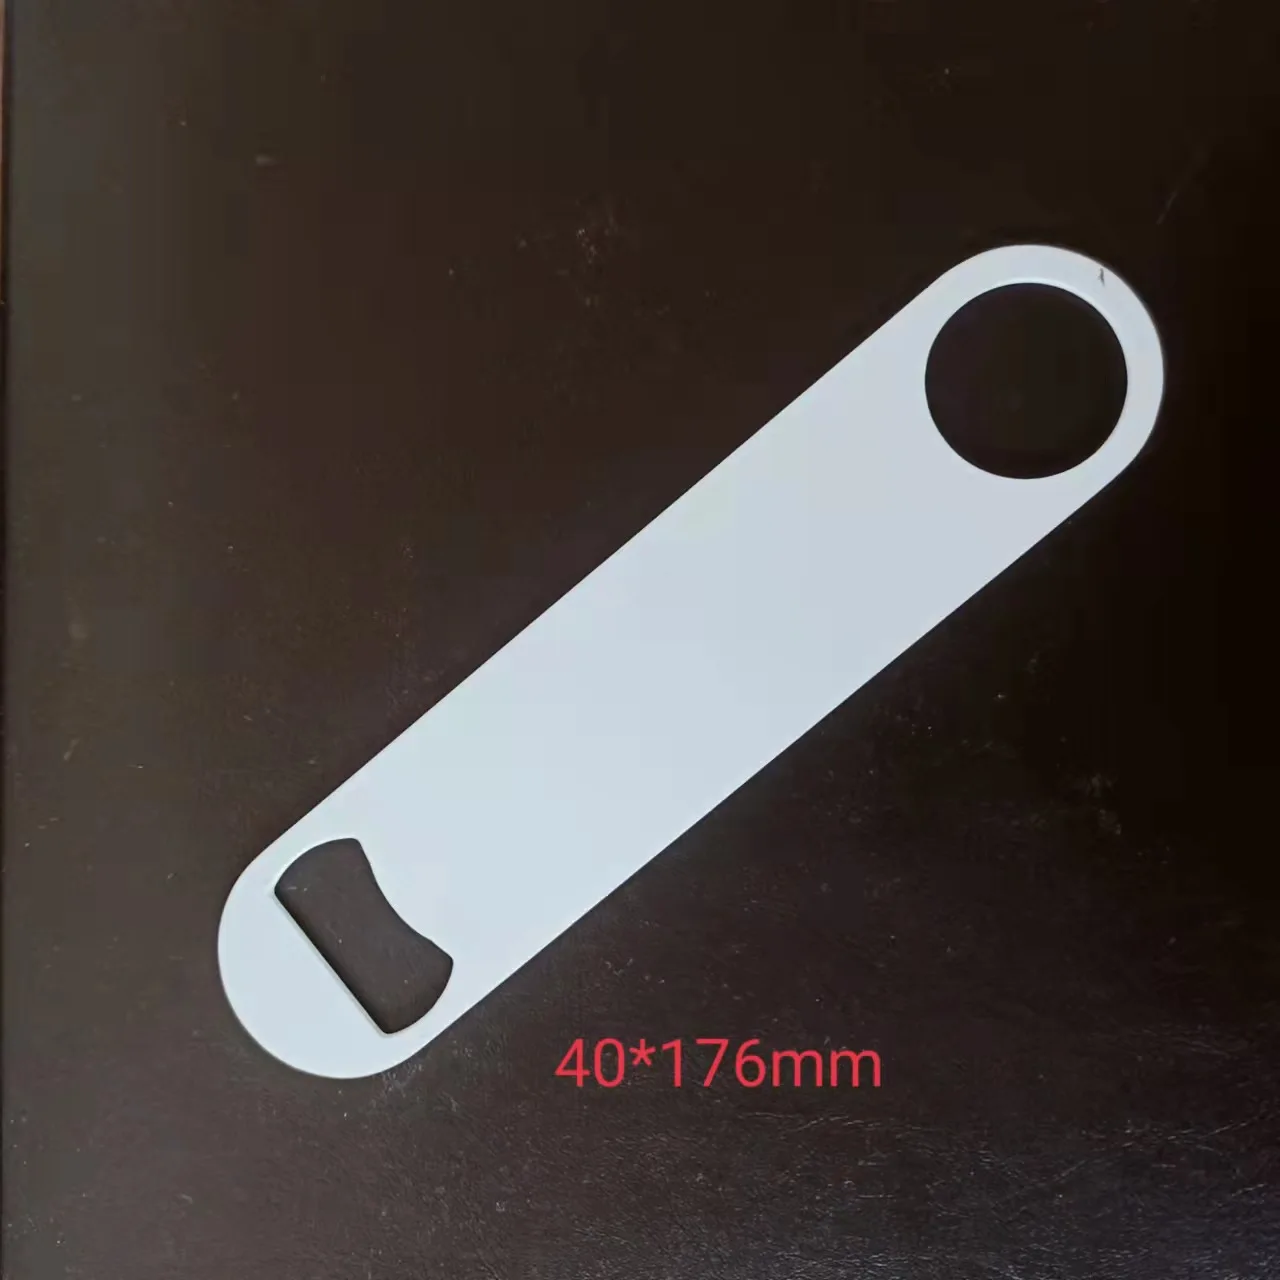 Factory Price!!! 100pcs/lot Bottle Beer Opener Cap Lifter Sublimation Blank White Dye INK Printing Heat Transfer High Quality